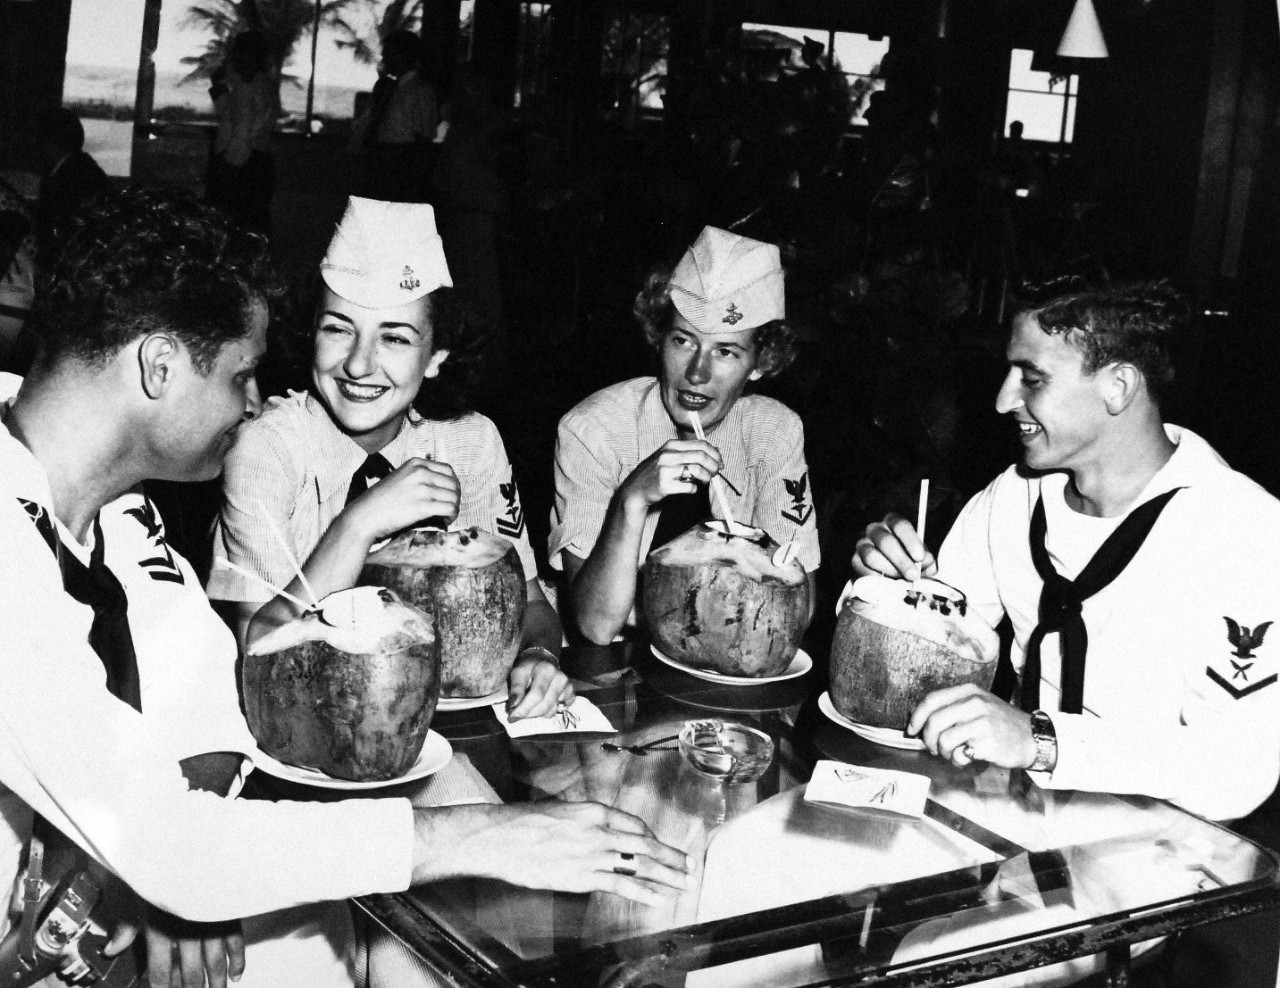 USN 709022:    WAVES and friends on liberty, October 1953.   Yum!  Yum!   The house specialty (chilled coconut milk, served in its original container isn’t sampled, it is consumed veraciously!   The two couples were appreciative guests of the manager of the Caribe Hilton Hotel for refreshments.  Left to Right:  LaFreniere; Paluzzi, Myers, and Baker.    Master Caption:   Navy Accepts Women Volunteers for Duty on the High Seas.   For the first time in history, the U.S. Navy has accepted volunteers for duty on the high seas from women in the enlisted WAVES.  Those eligible were WAVES of the Hospital Corps to fill sixty-three billets on ships of the Military Sea Transportation Service.  Photograph released October 26, 1953.   Official U.S. Navy photograph, now in the collections of the National Archives.   